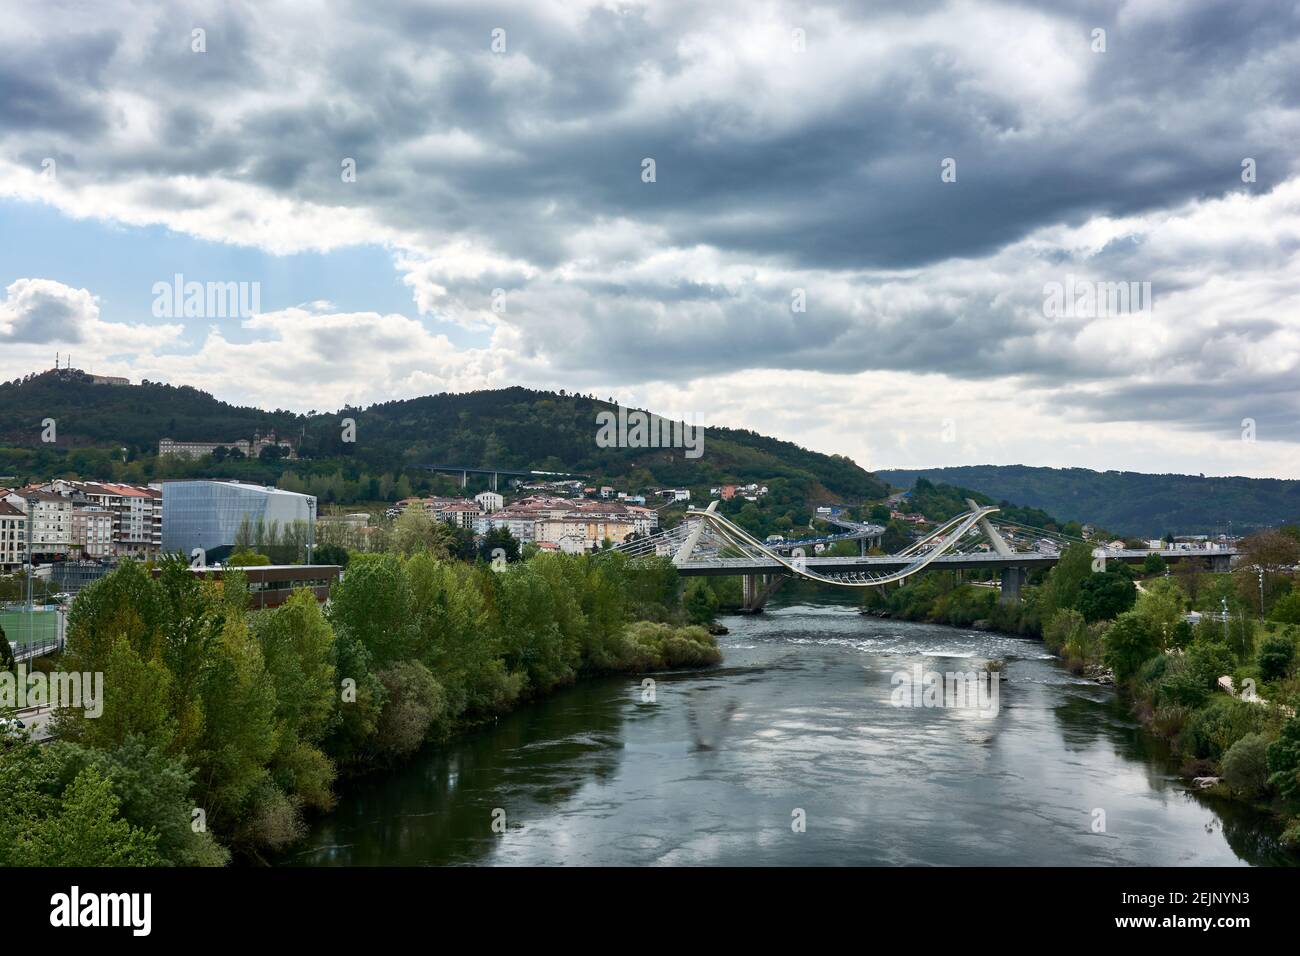 Cityscape with view of the Millenium Bridge on the Minho River seen from the Roman Bridge in the picturesque medieval city of Ourense in Galicia, Spai Stock Photo